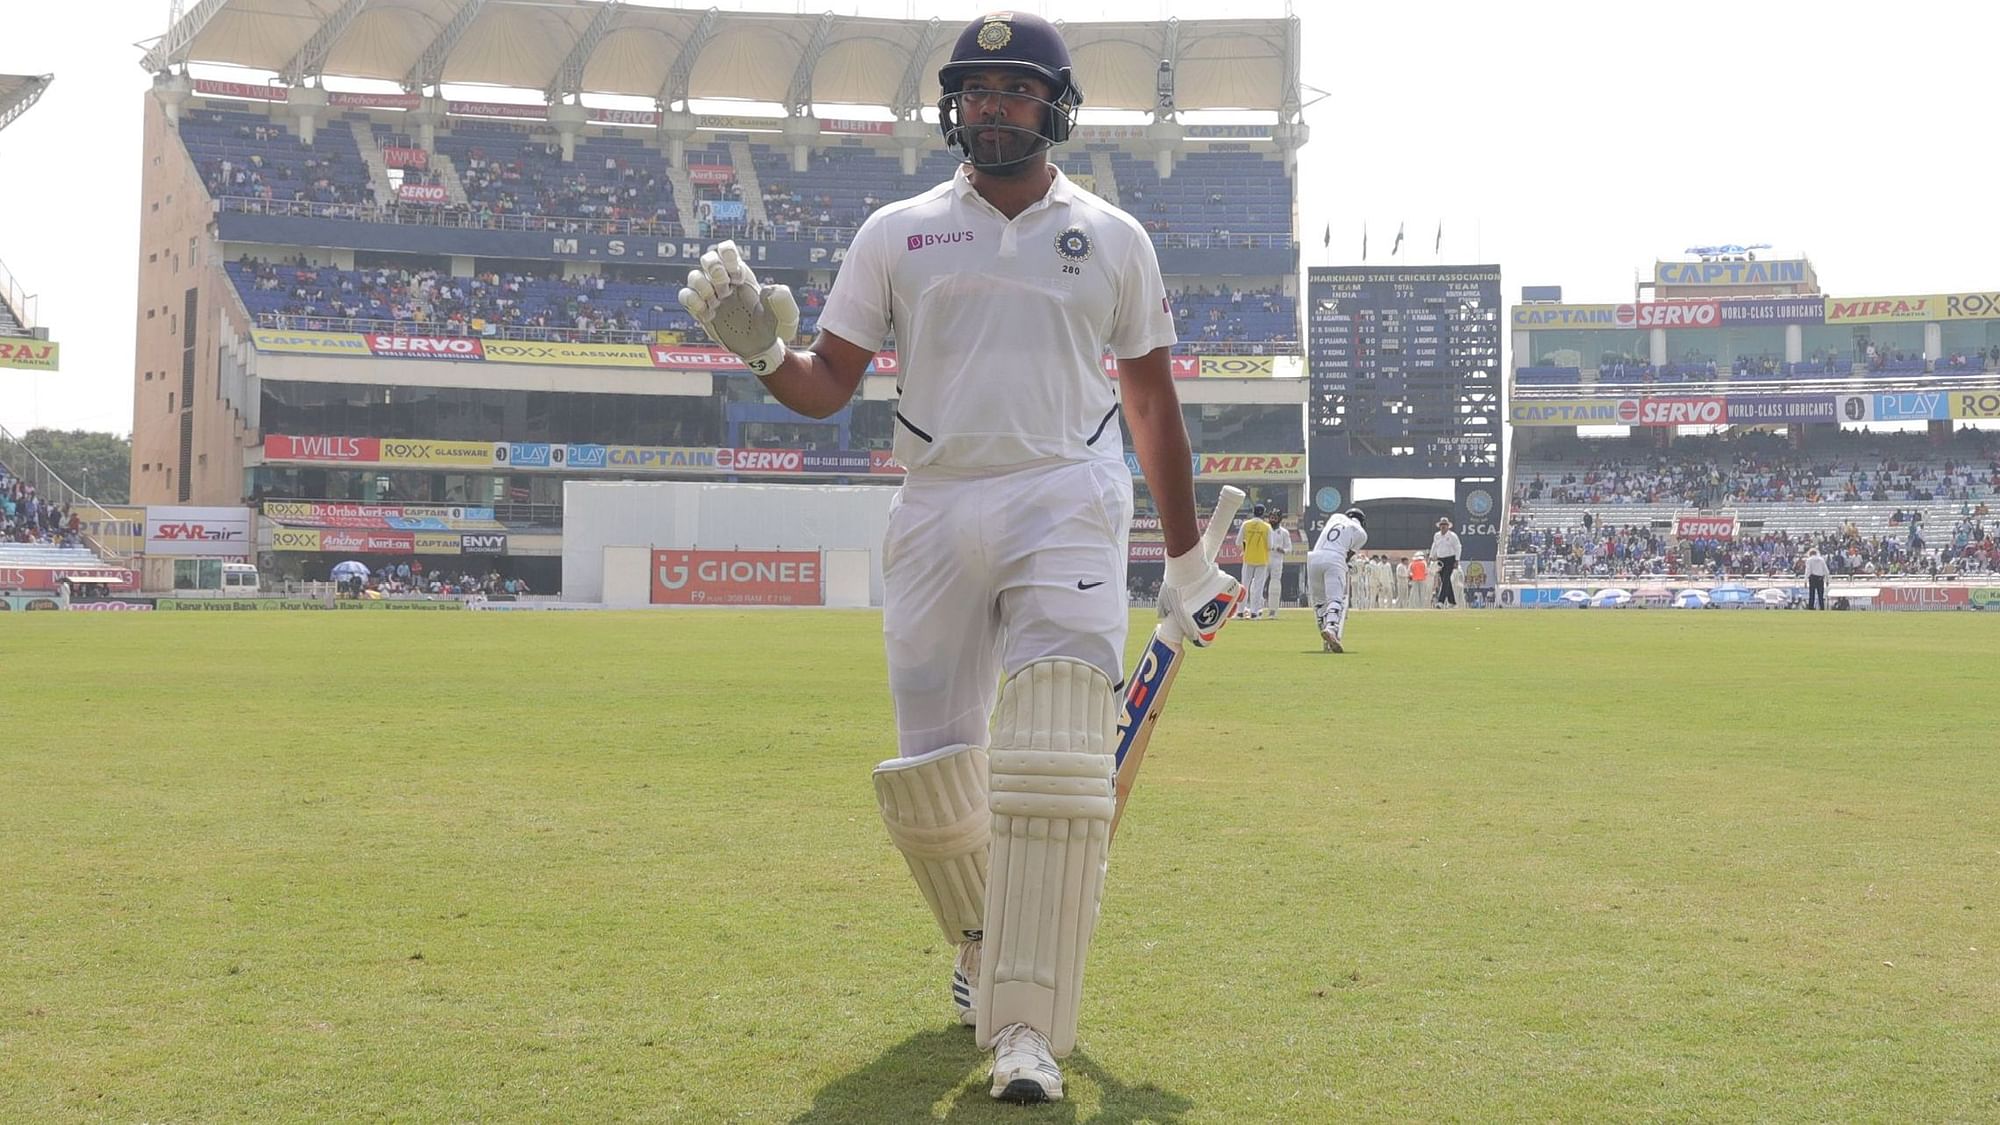 Rohit Sharma struck his maiden double century in Test cricket in the third match against South Africa in Ranchi on Sunday, 20 October.